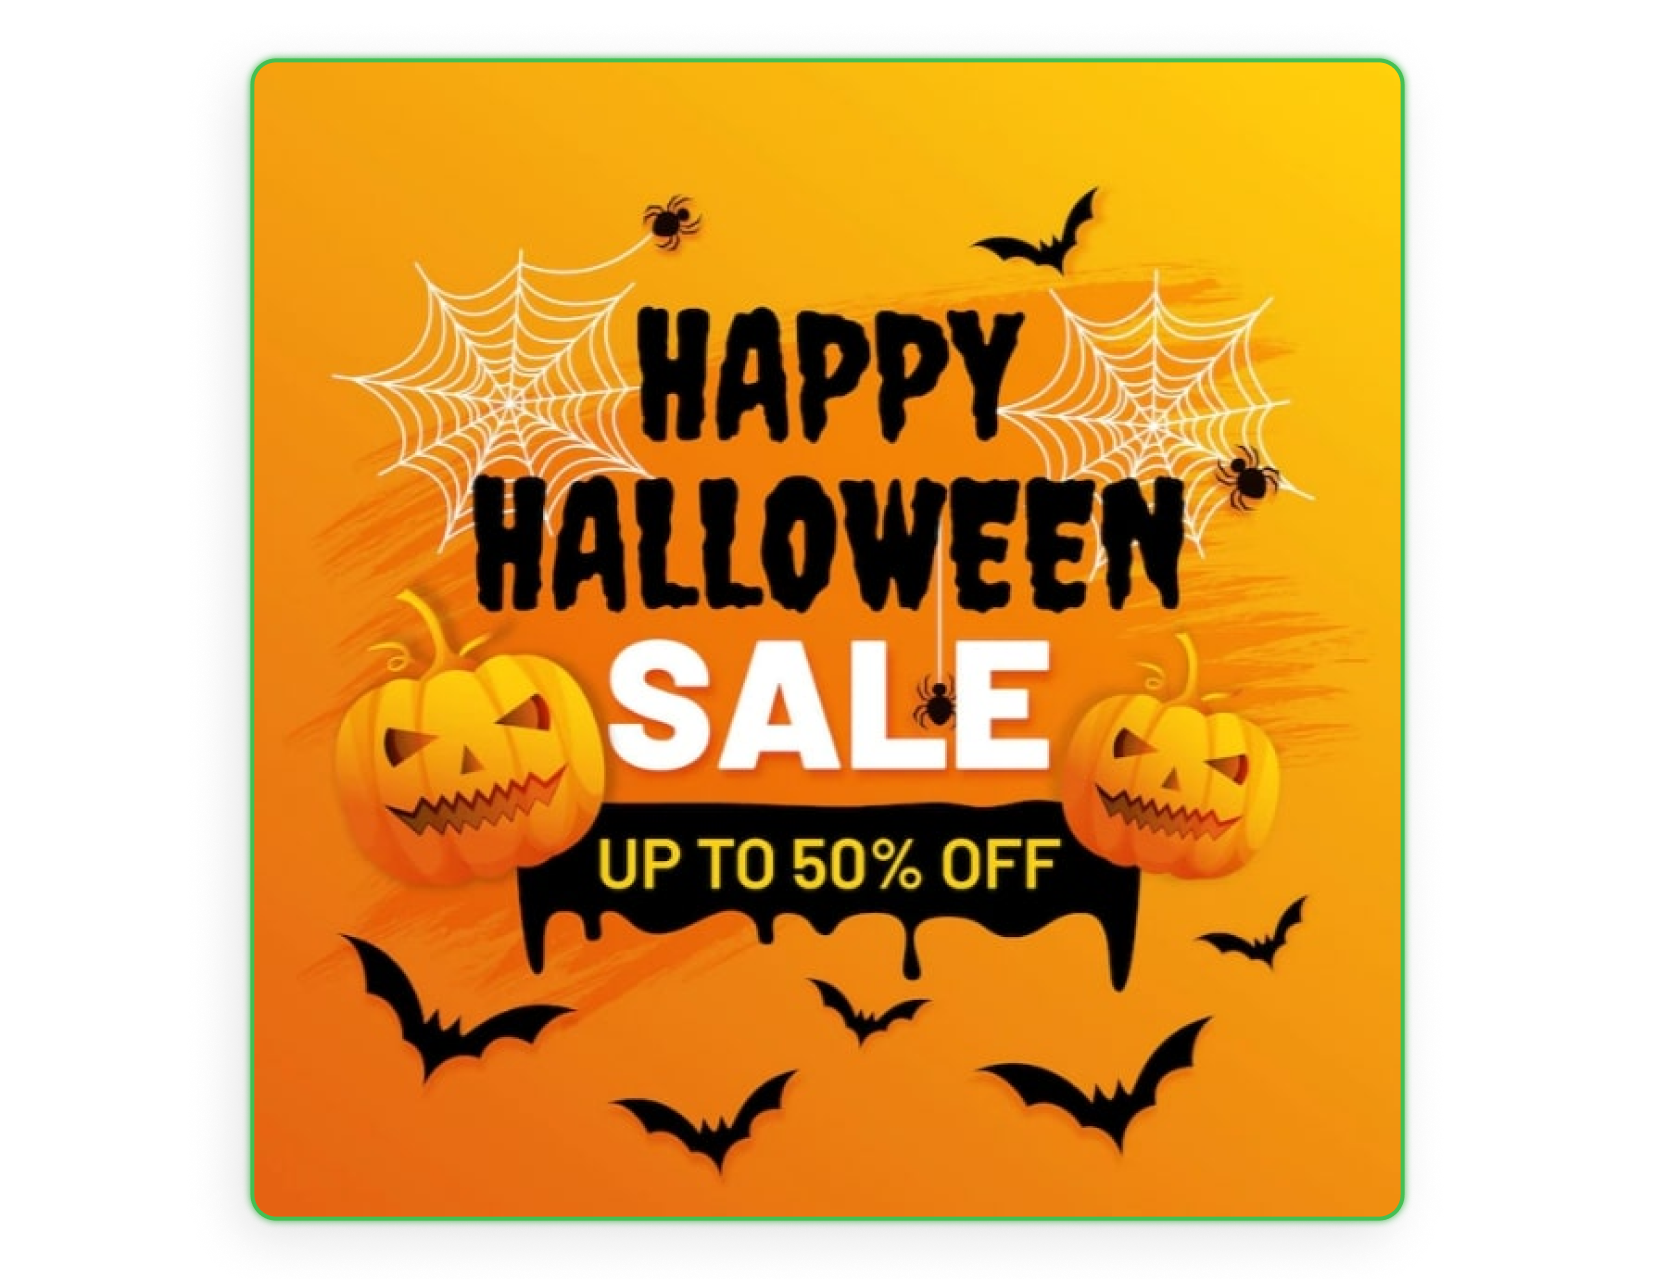 Example of a Halloween promotion